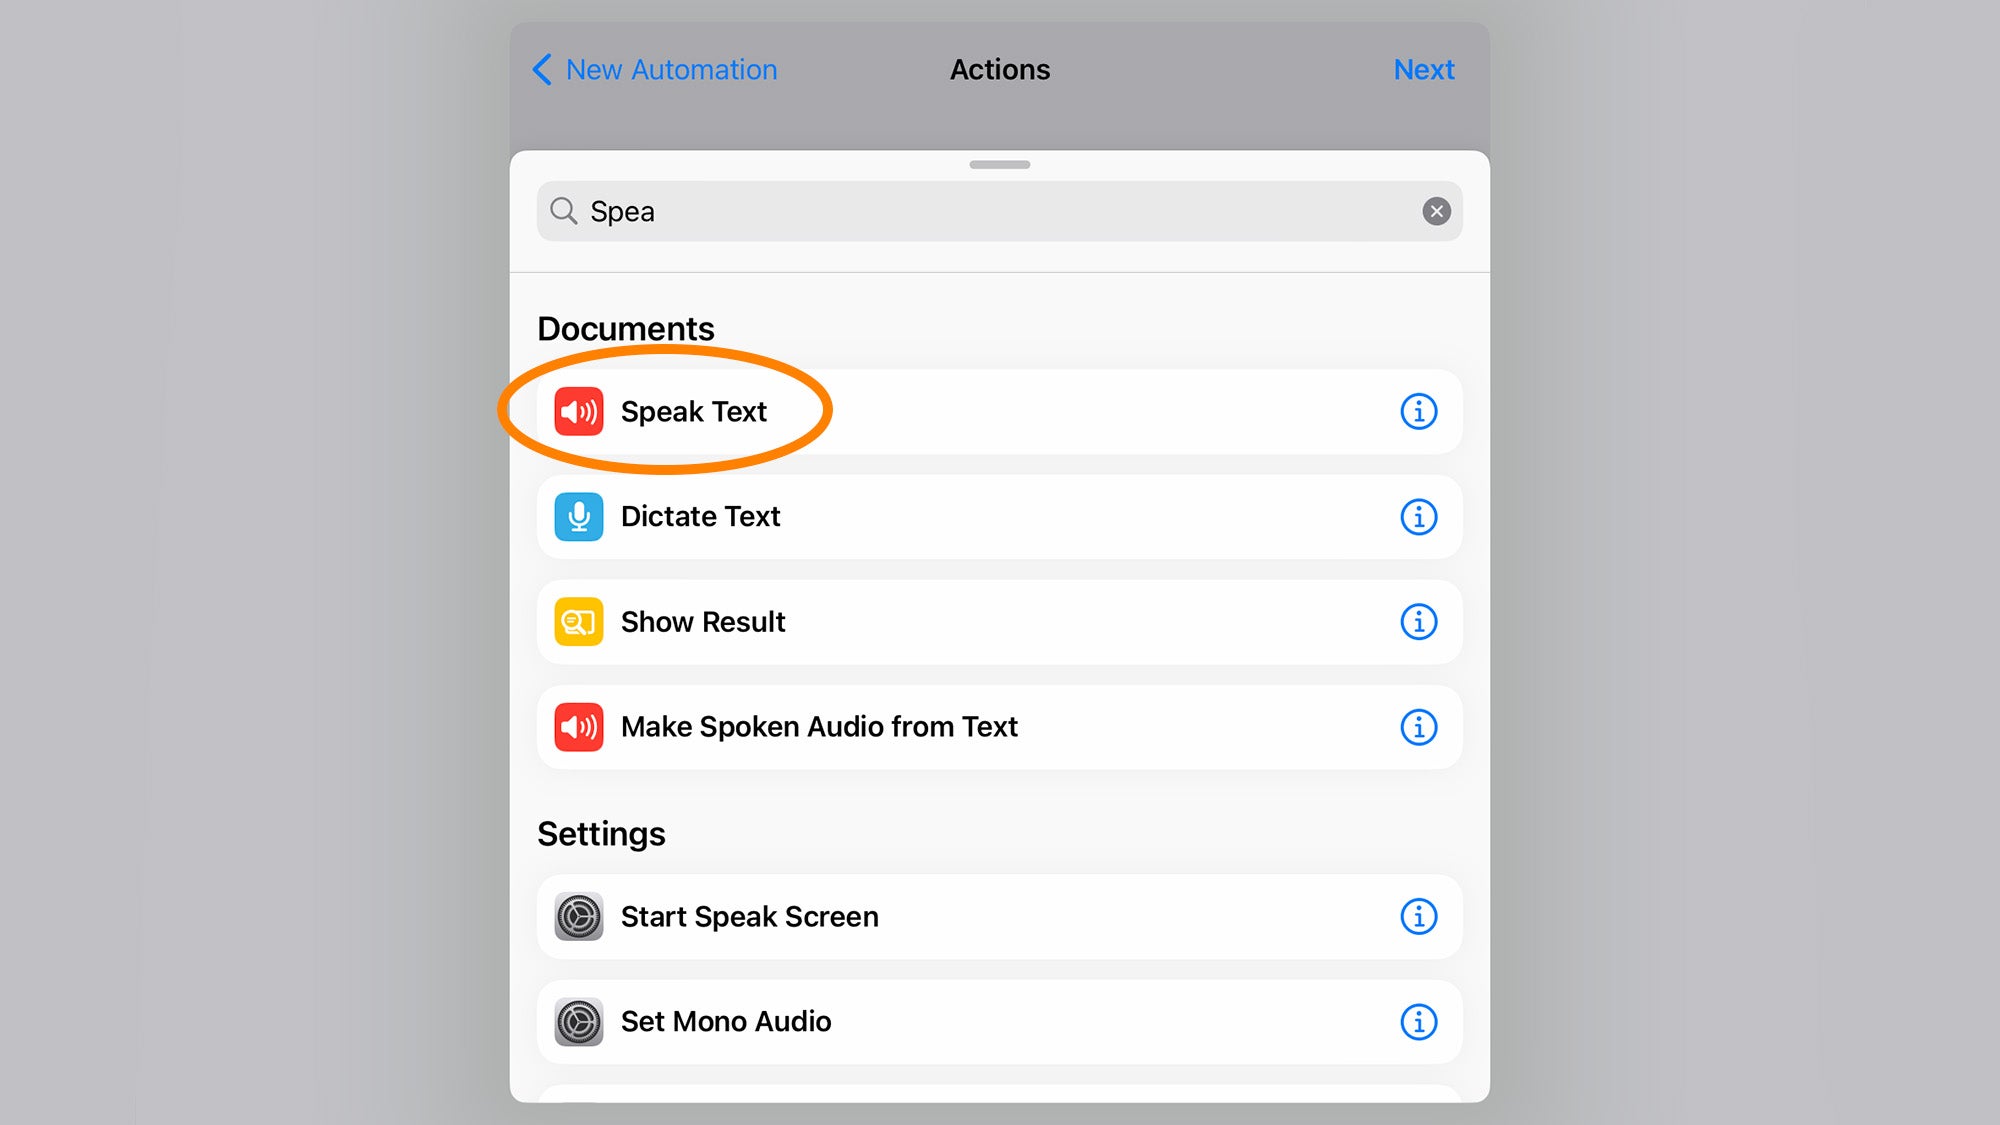 Action menu for iPhone automations